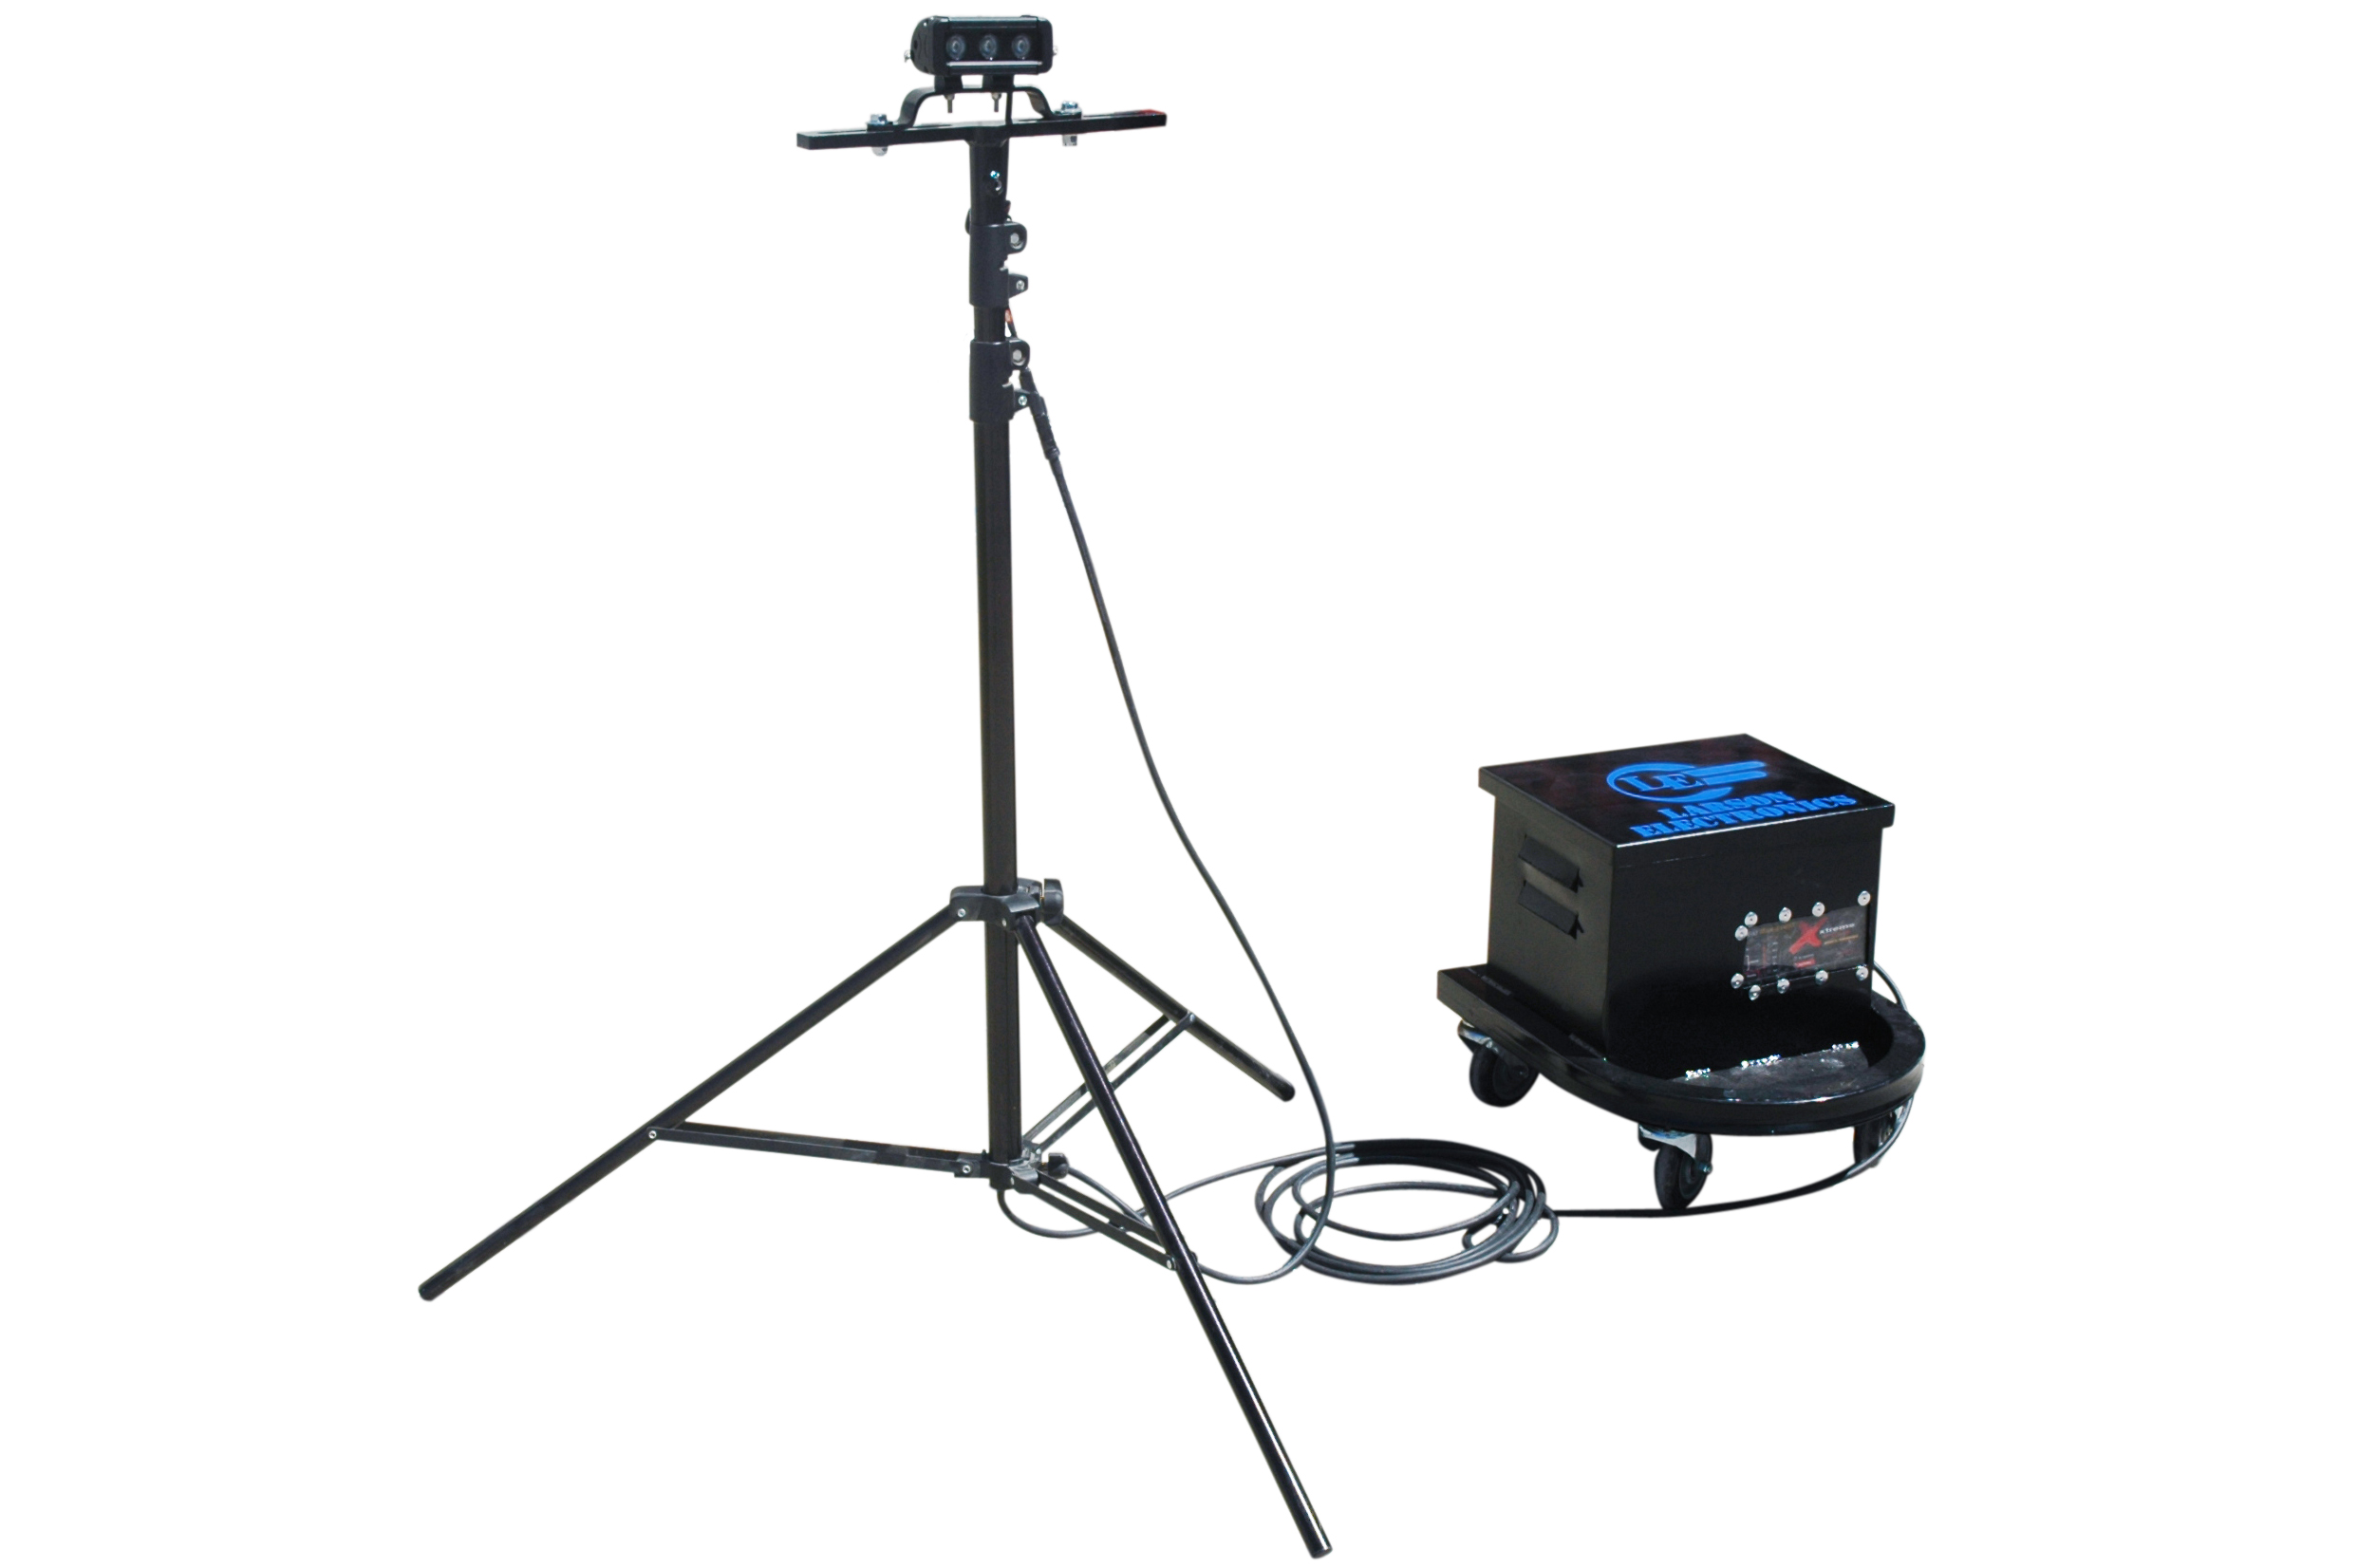 Portable LED Light System with Rechargeable Battery Bank